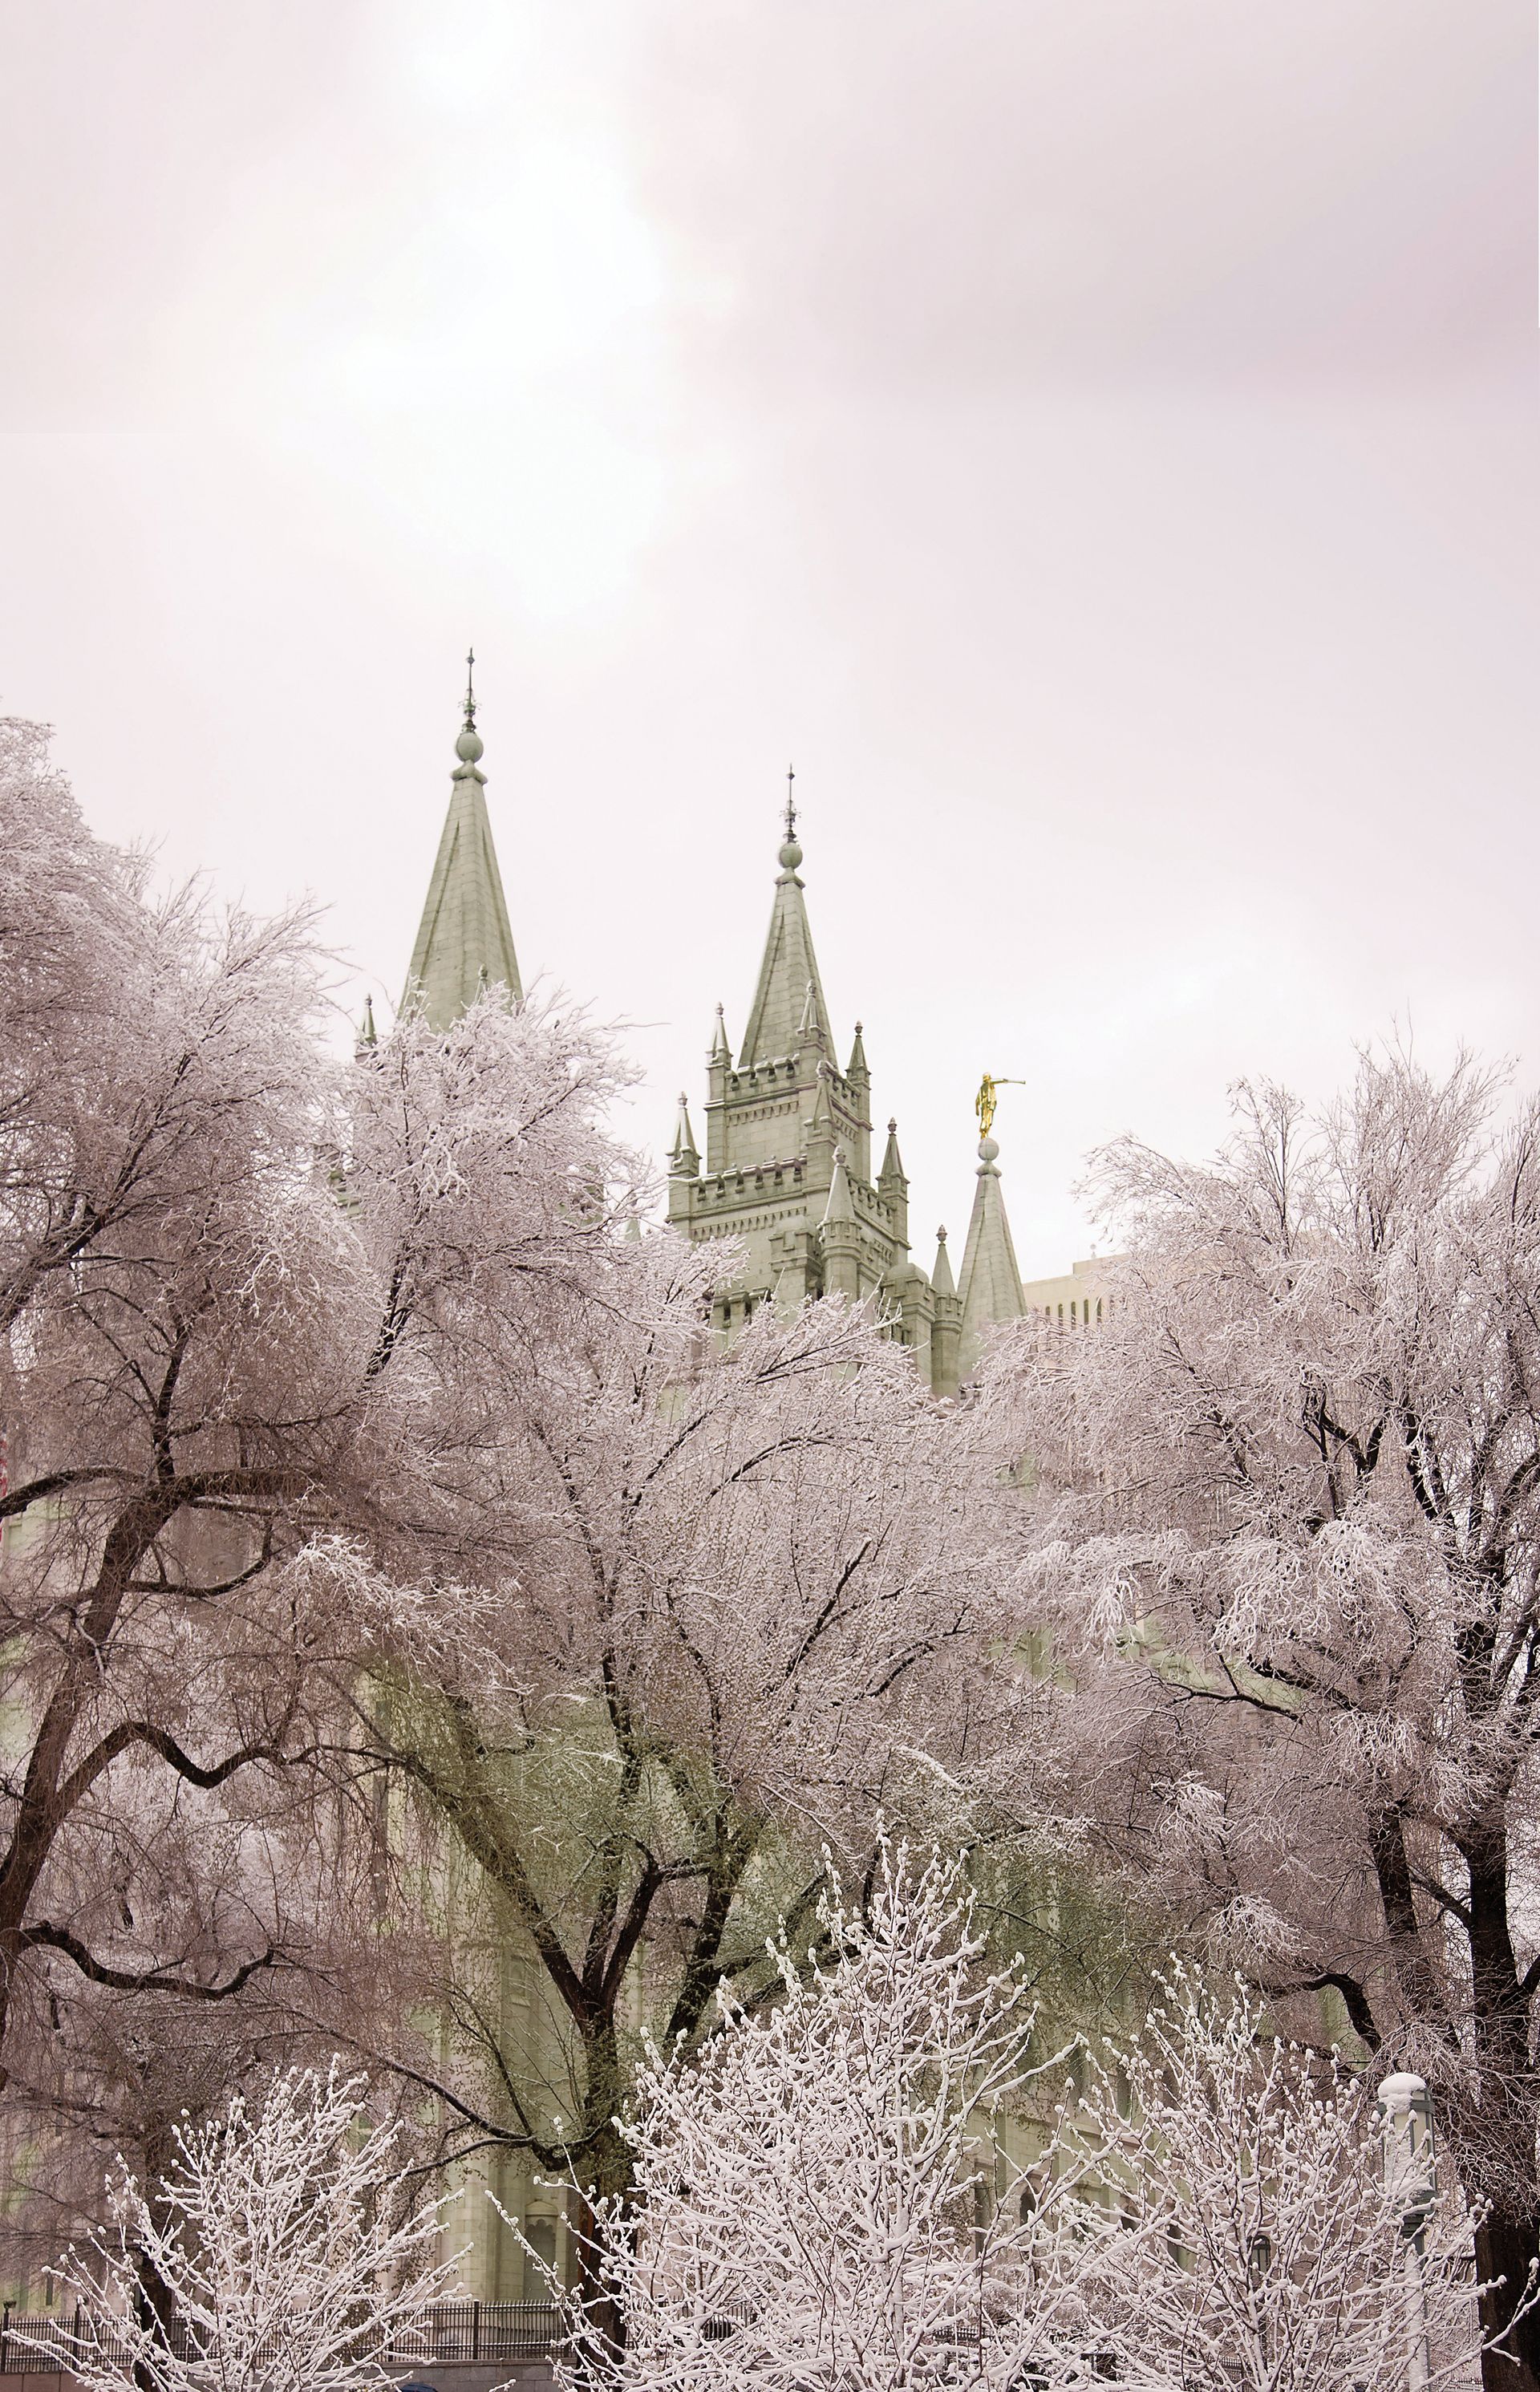 The Salt Lake Temple during winter, including the spires and scenery.